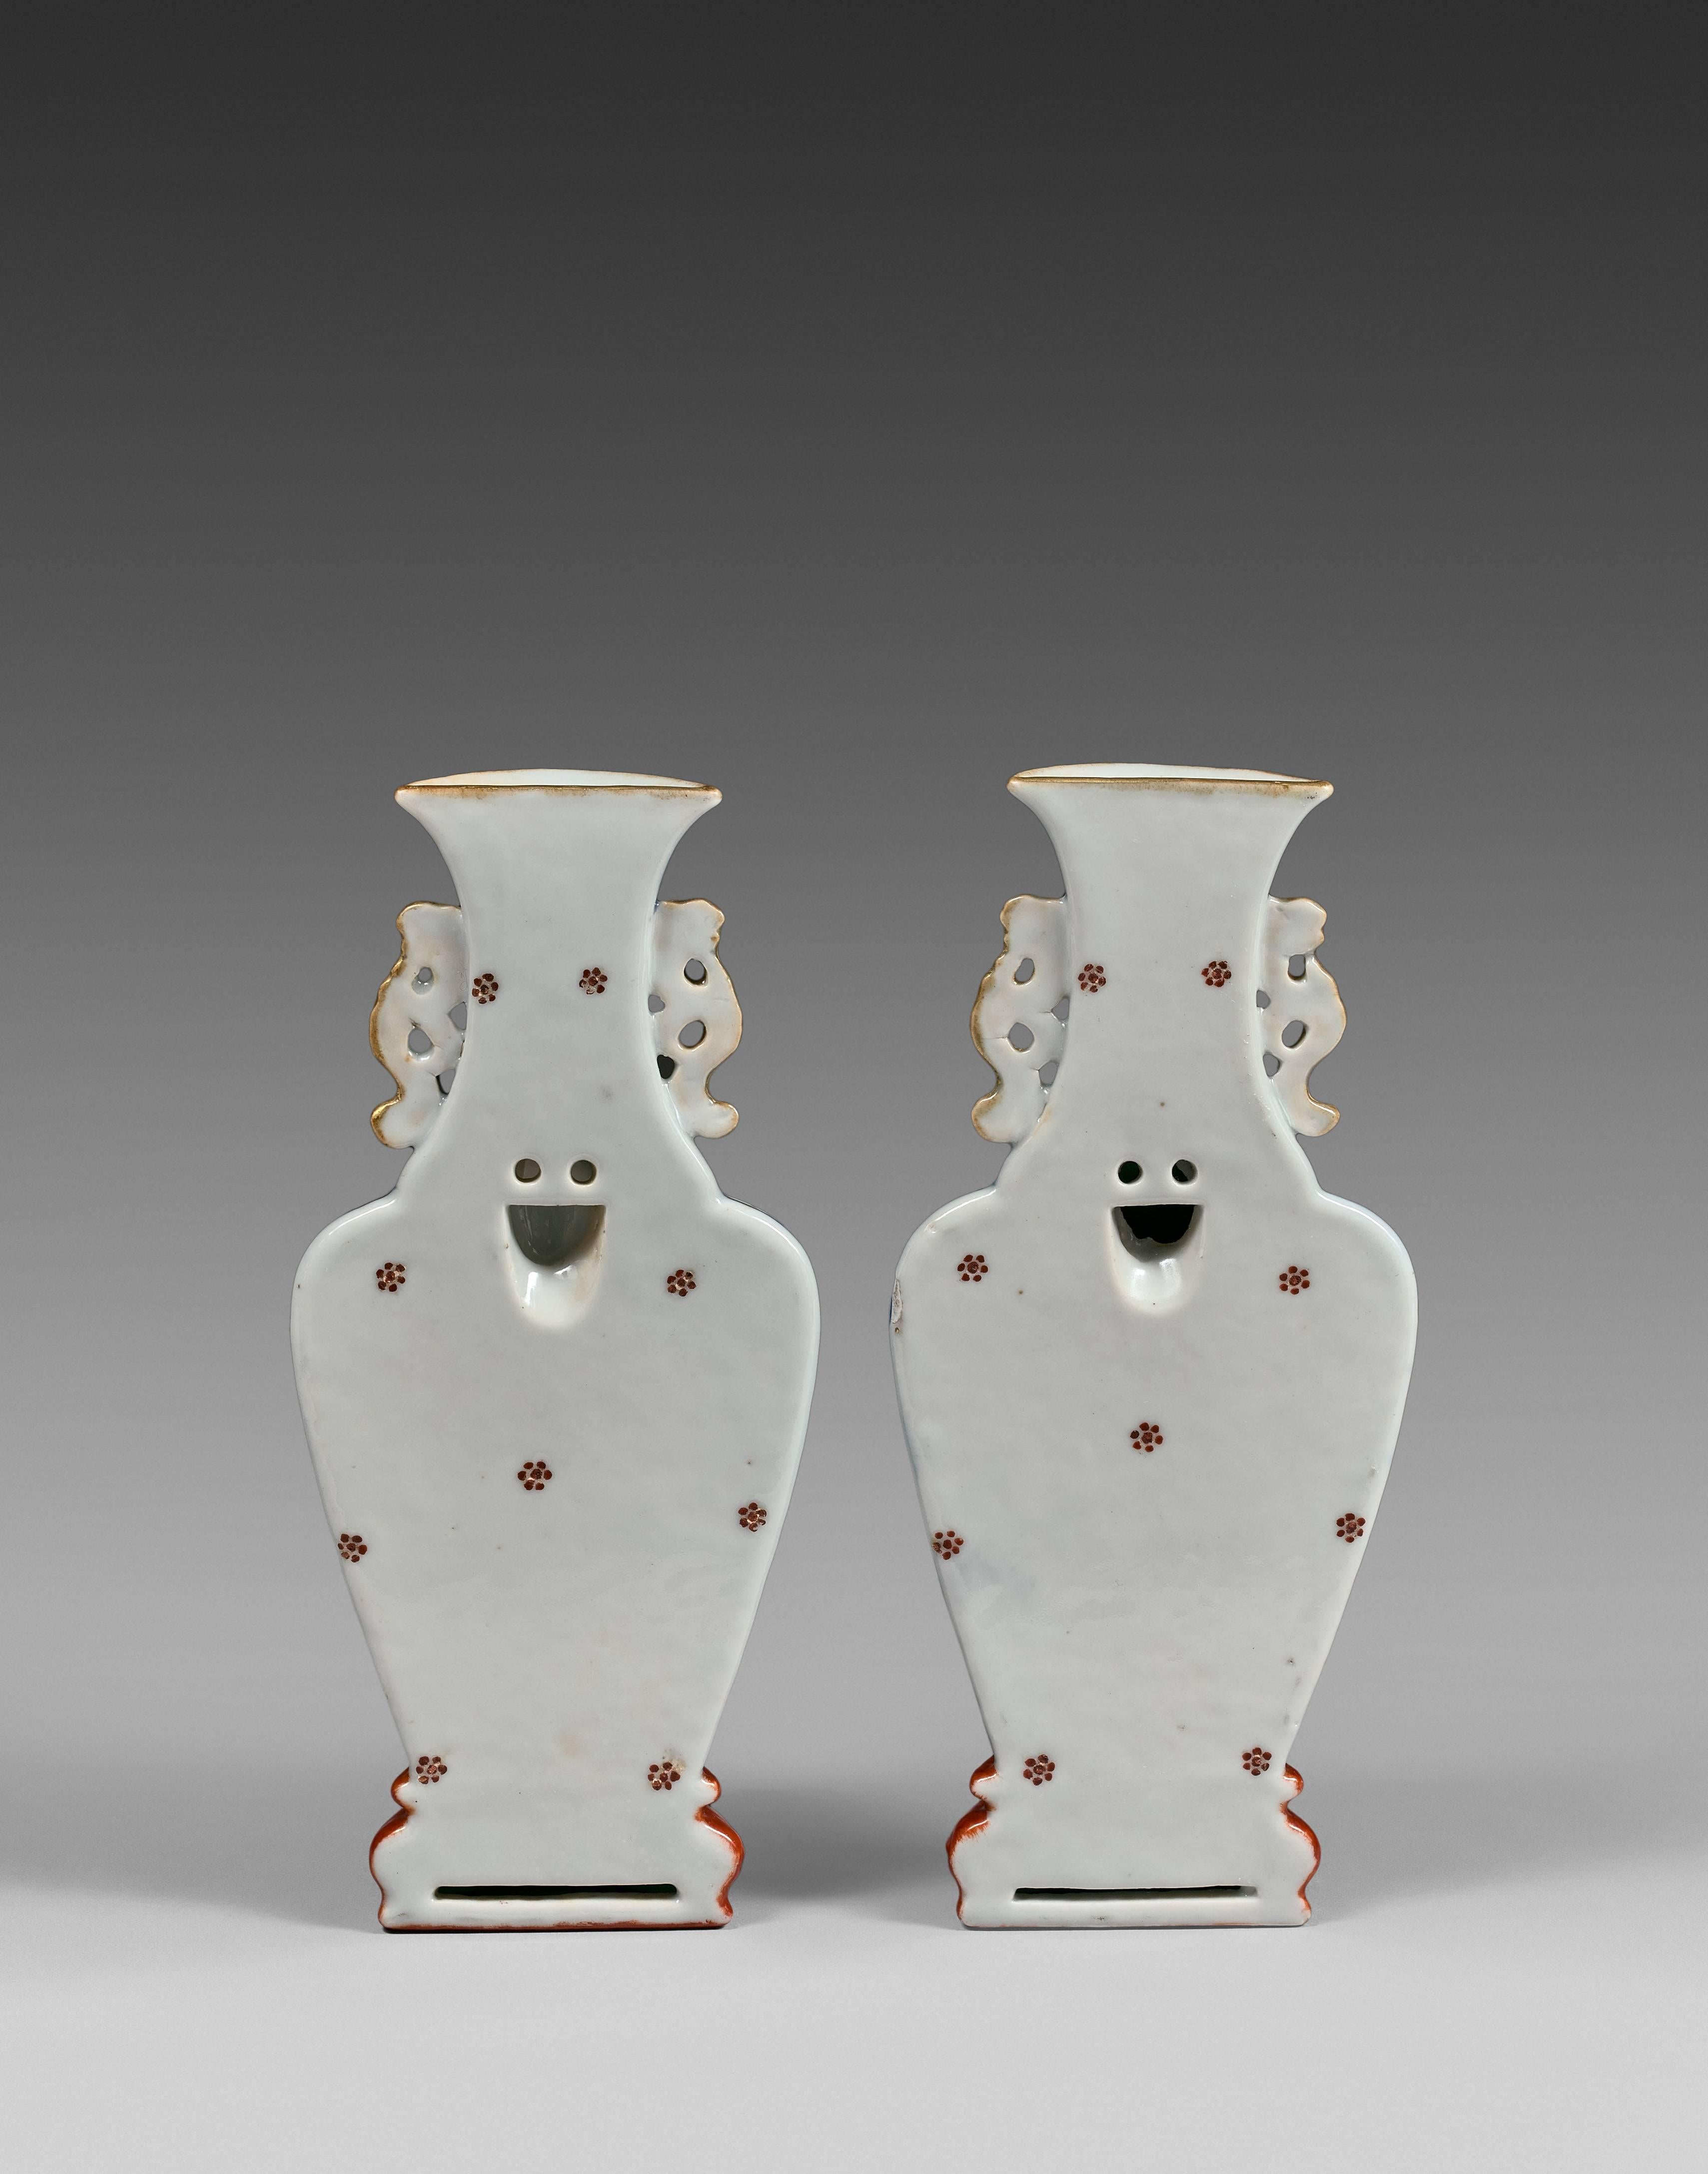 Each vase flattened at the back, the body sweeping up from a short splayed foot to a broad shoulder and waisted neck, the neck flanked by a pair of archaistic scroll handles, all resting on a trompe l'oeil faux-bois stand, the body and neck